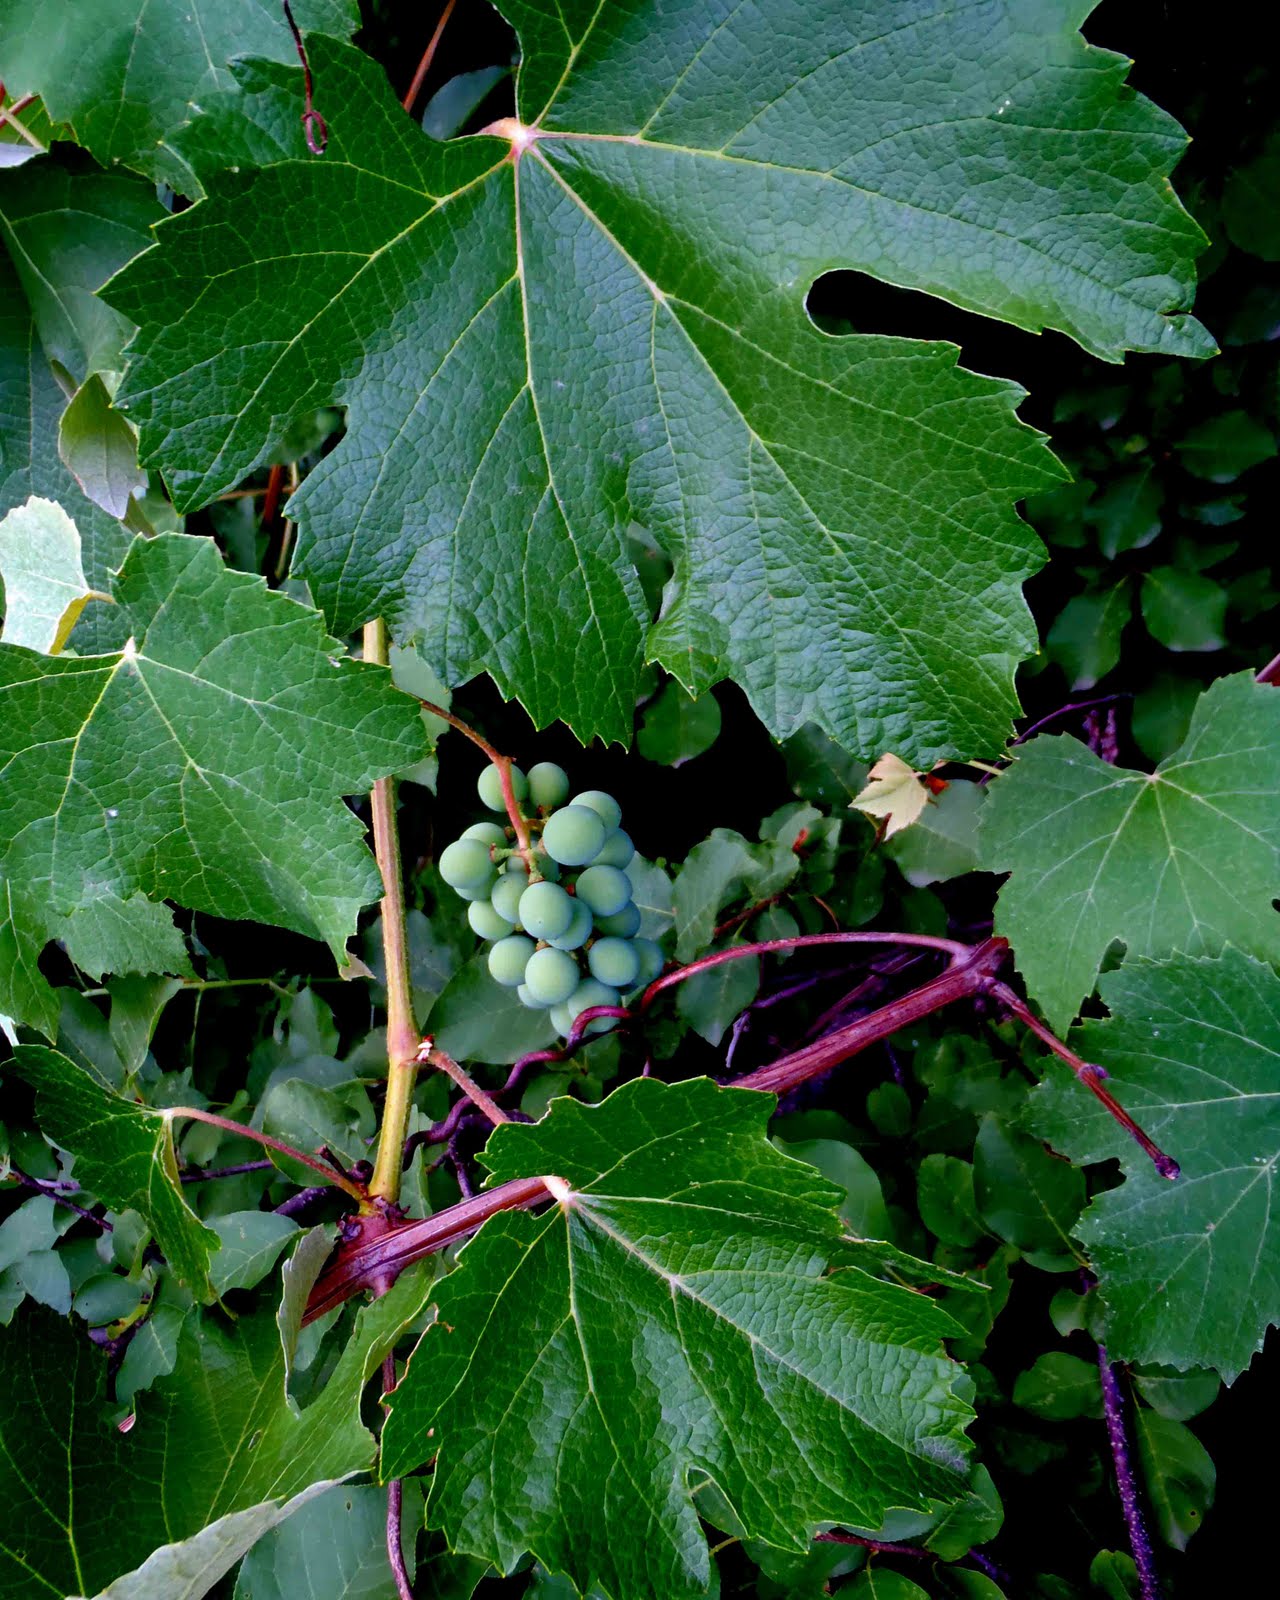 Wild Things in August - Grape